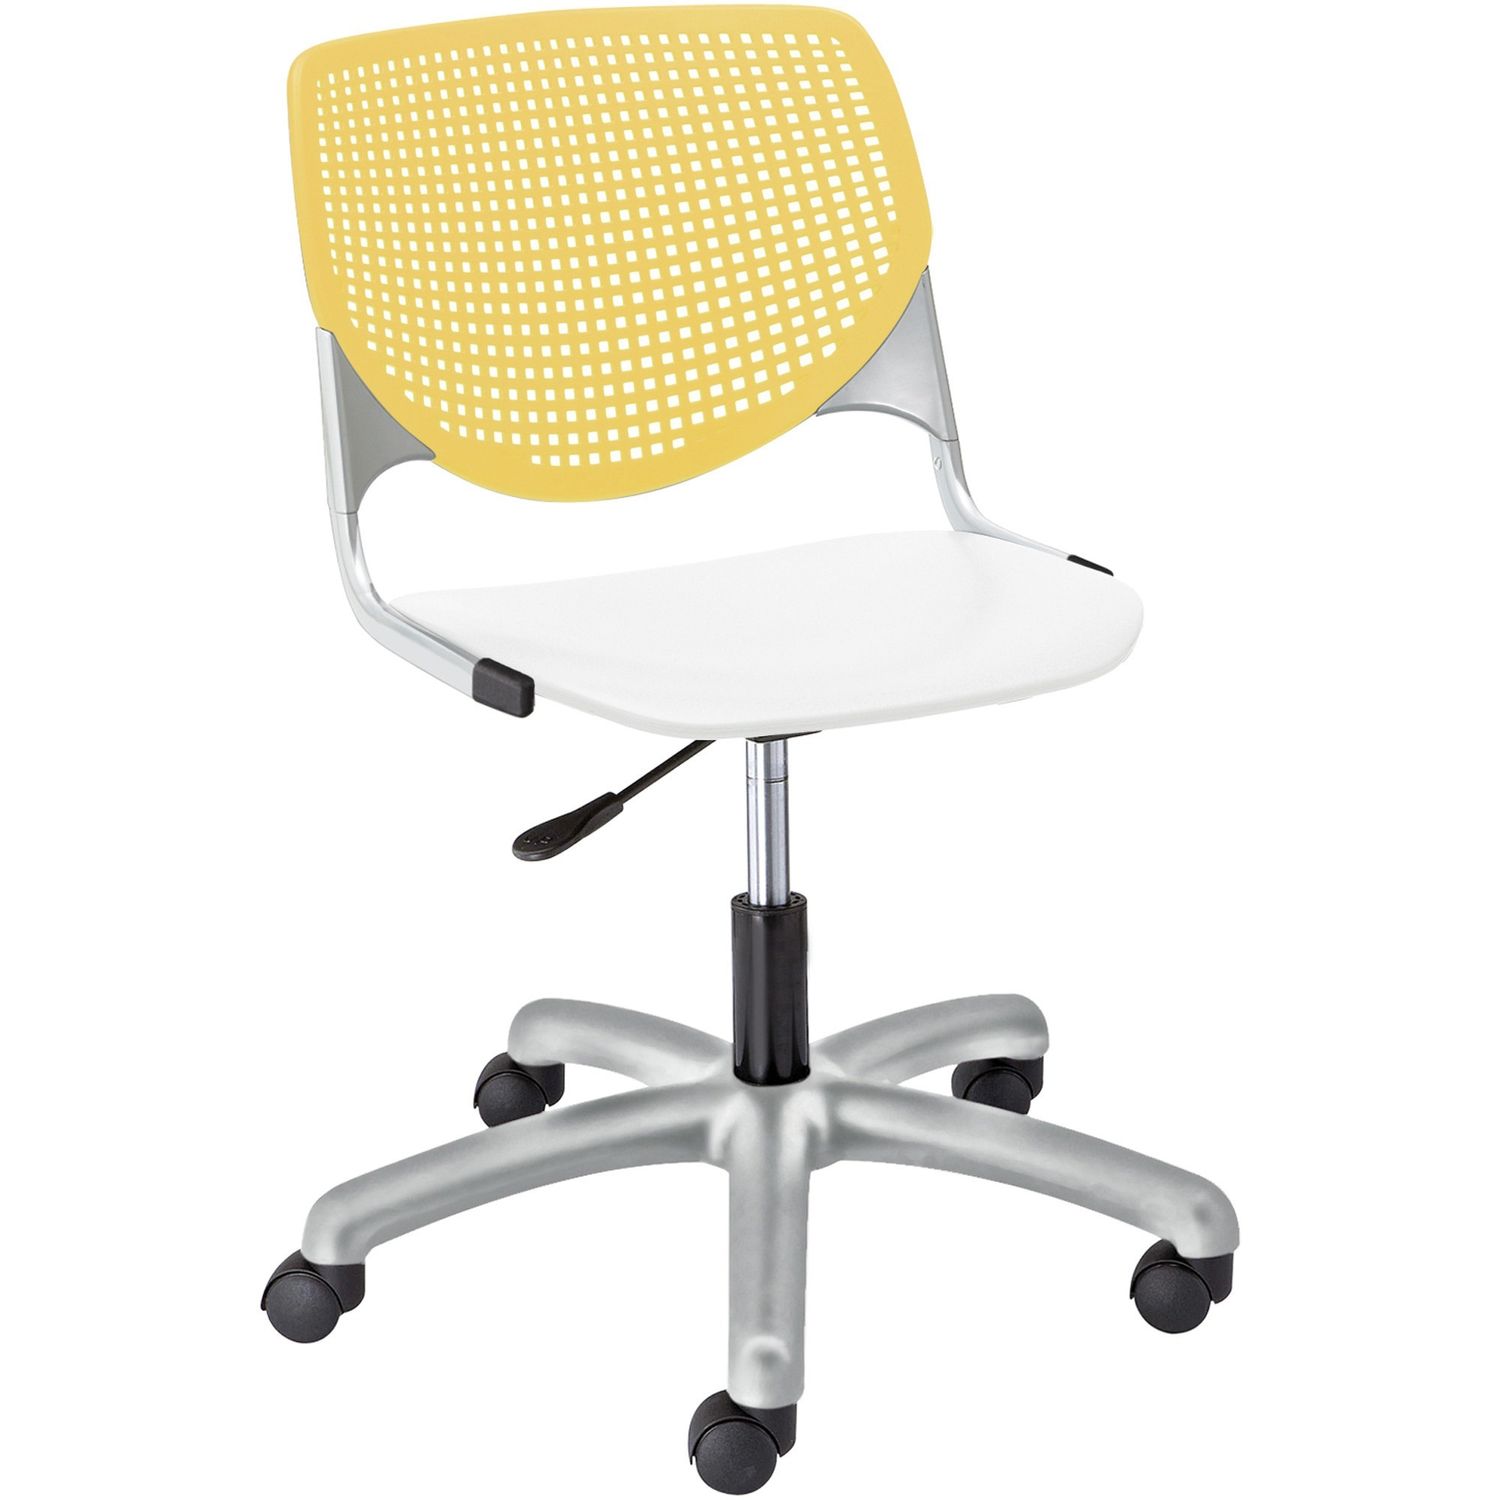 Kool Task Chair With Perforated Back White Polypropylene Seat, Yellow Polypropylene, Aluminum Alloy Back, Powder Coated Silver Tubular Steel Frame, 5-star Base, 1 Each